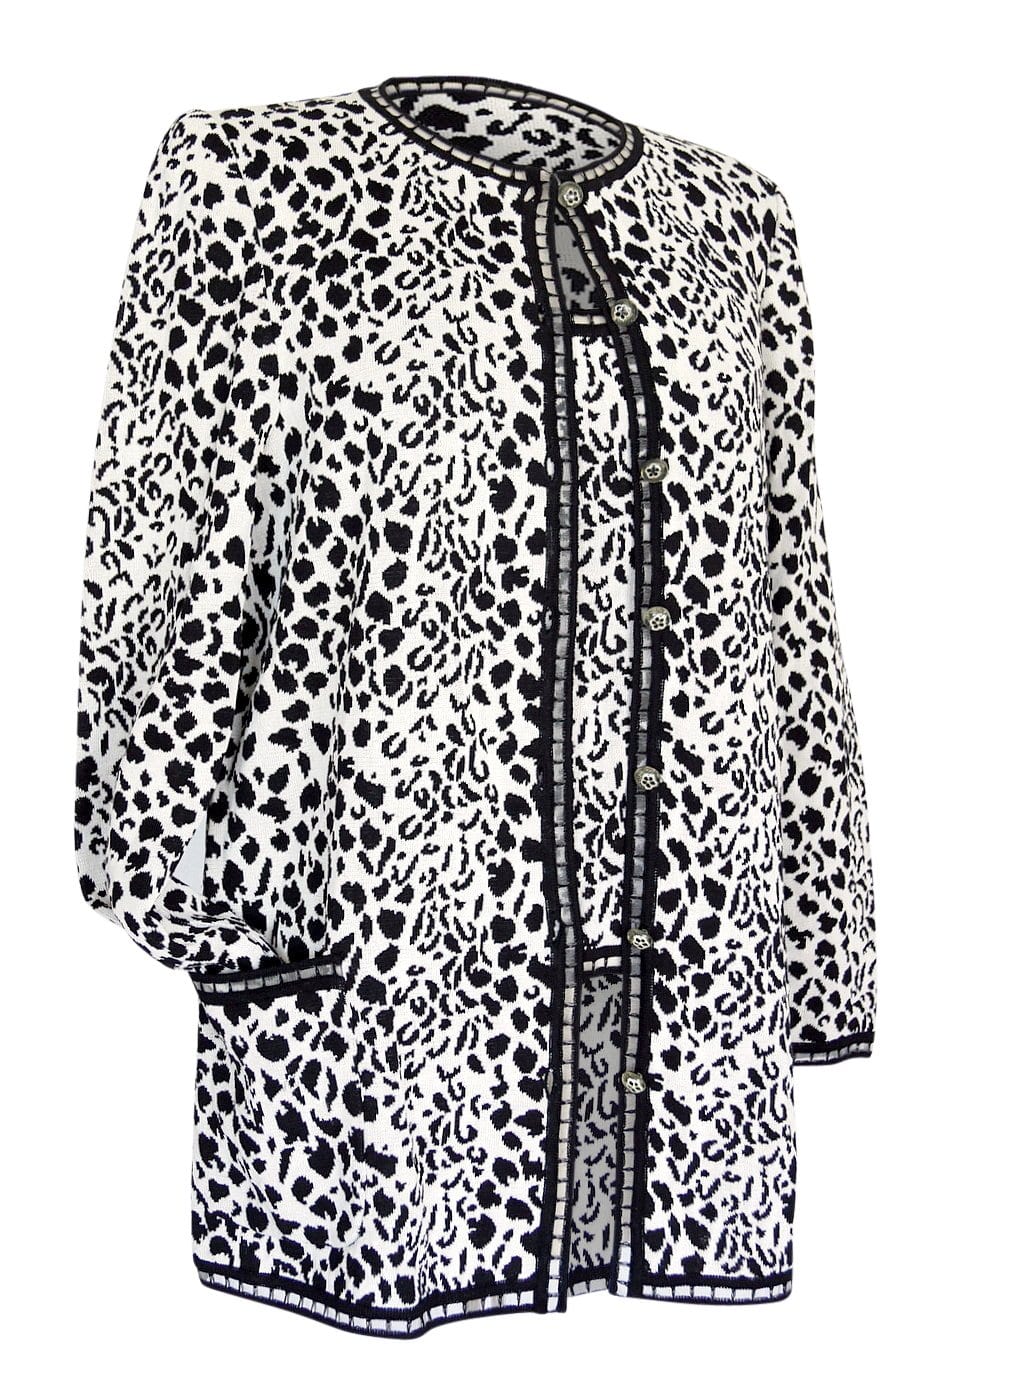 Emanuel Ungaro Twinset Animal Print Black and White Lovely Buttons XL - mightychic